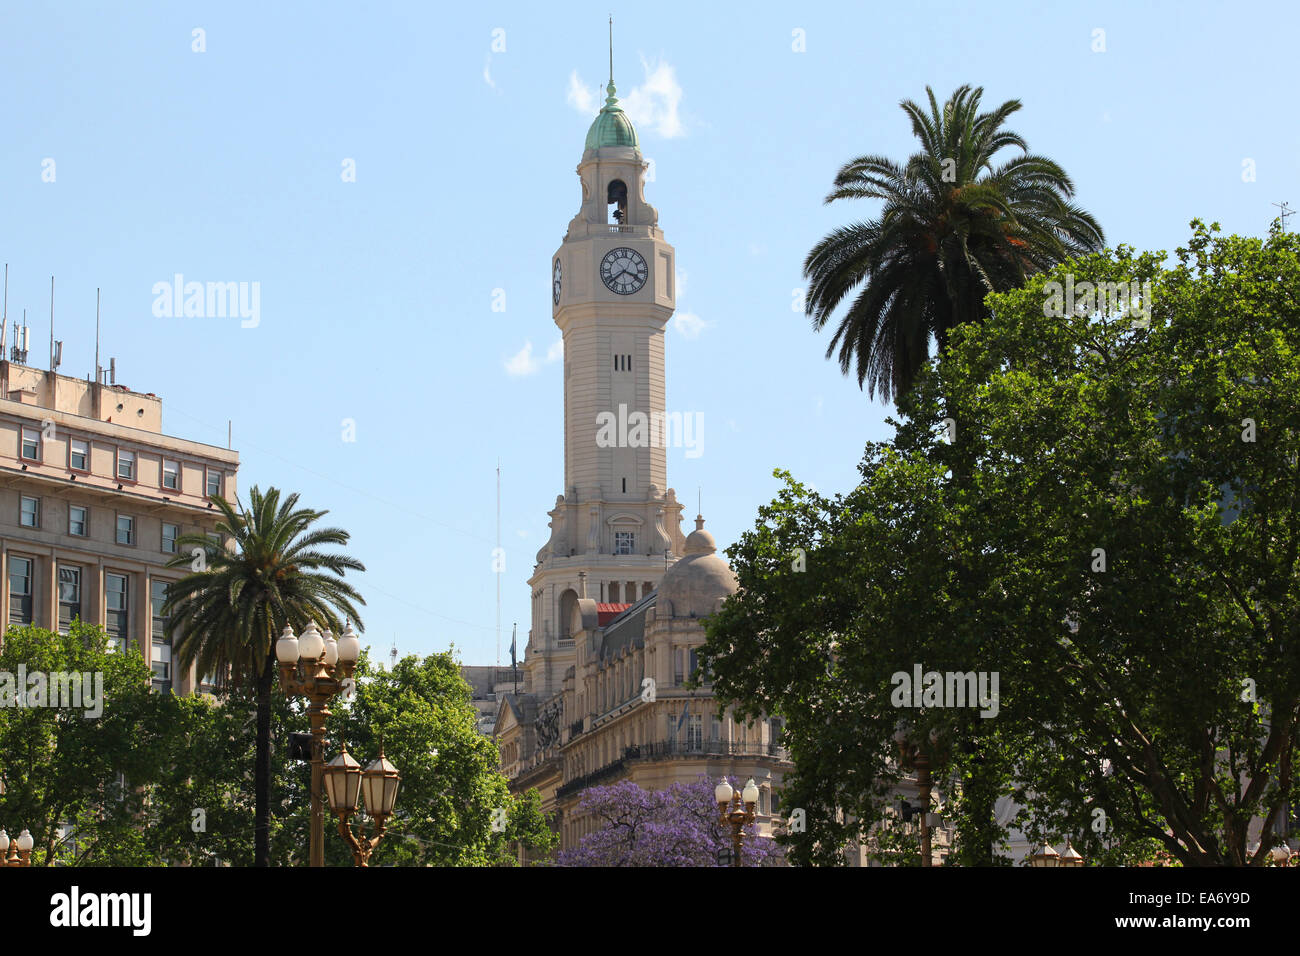 The 'City legislature' building seen from Plaza de Mayo. Buenos Aires, Argentina. Stock Photo